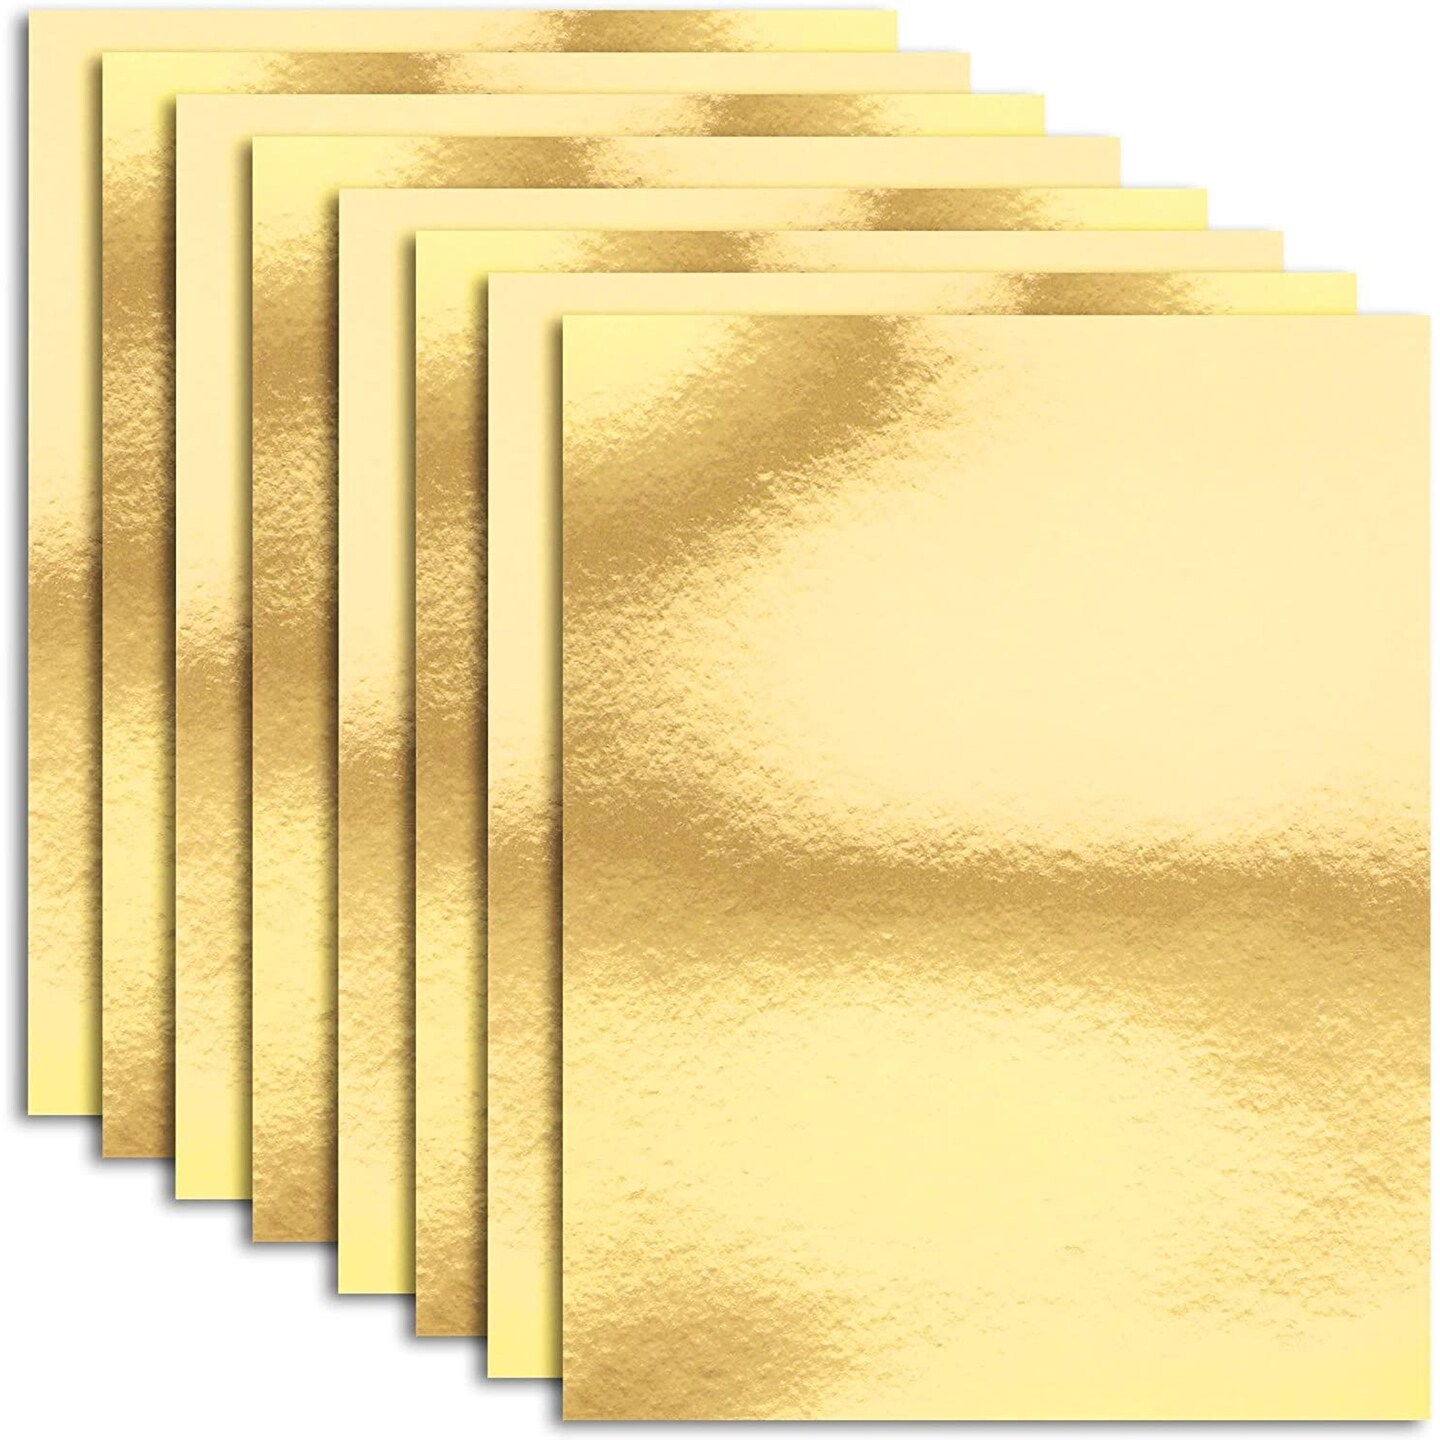 Hygloss Products Embossed Metallic Foil Paper for Arts & Crafts,  Scrapbooking, Card Making, Assorted Colors & Designs, 12x12-Inch, 50Pack